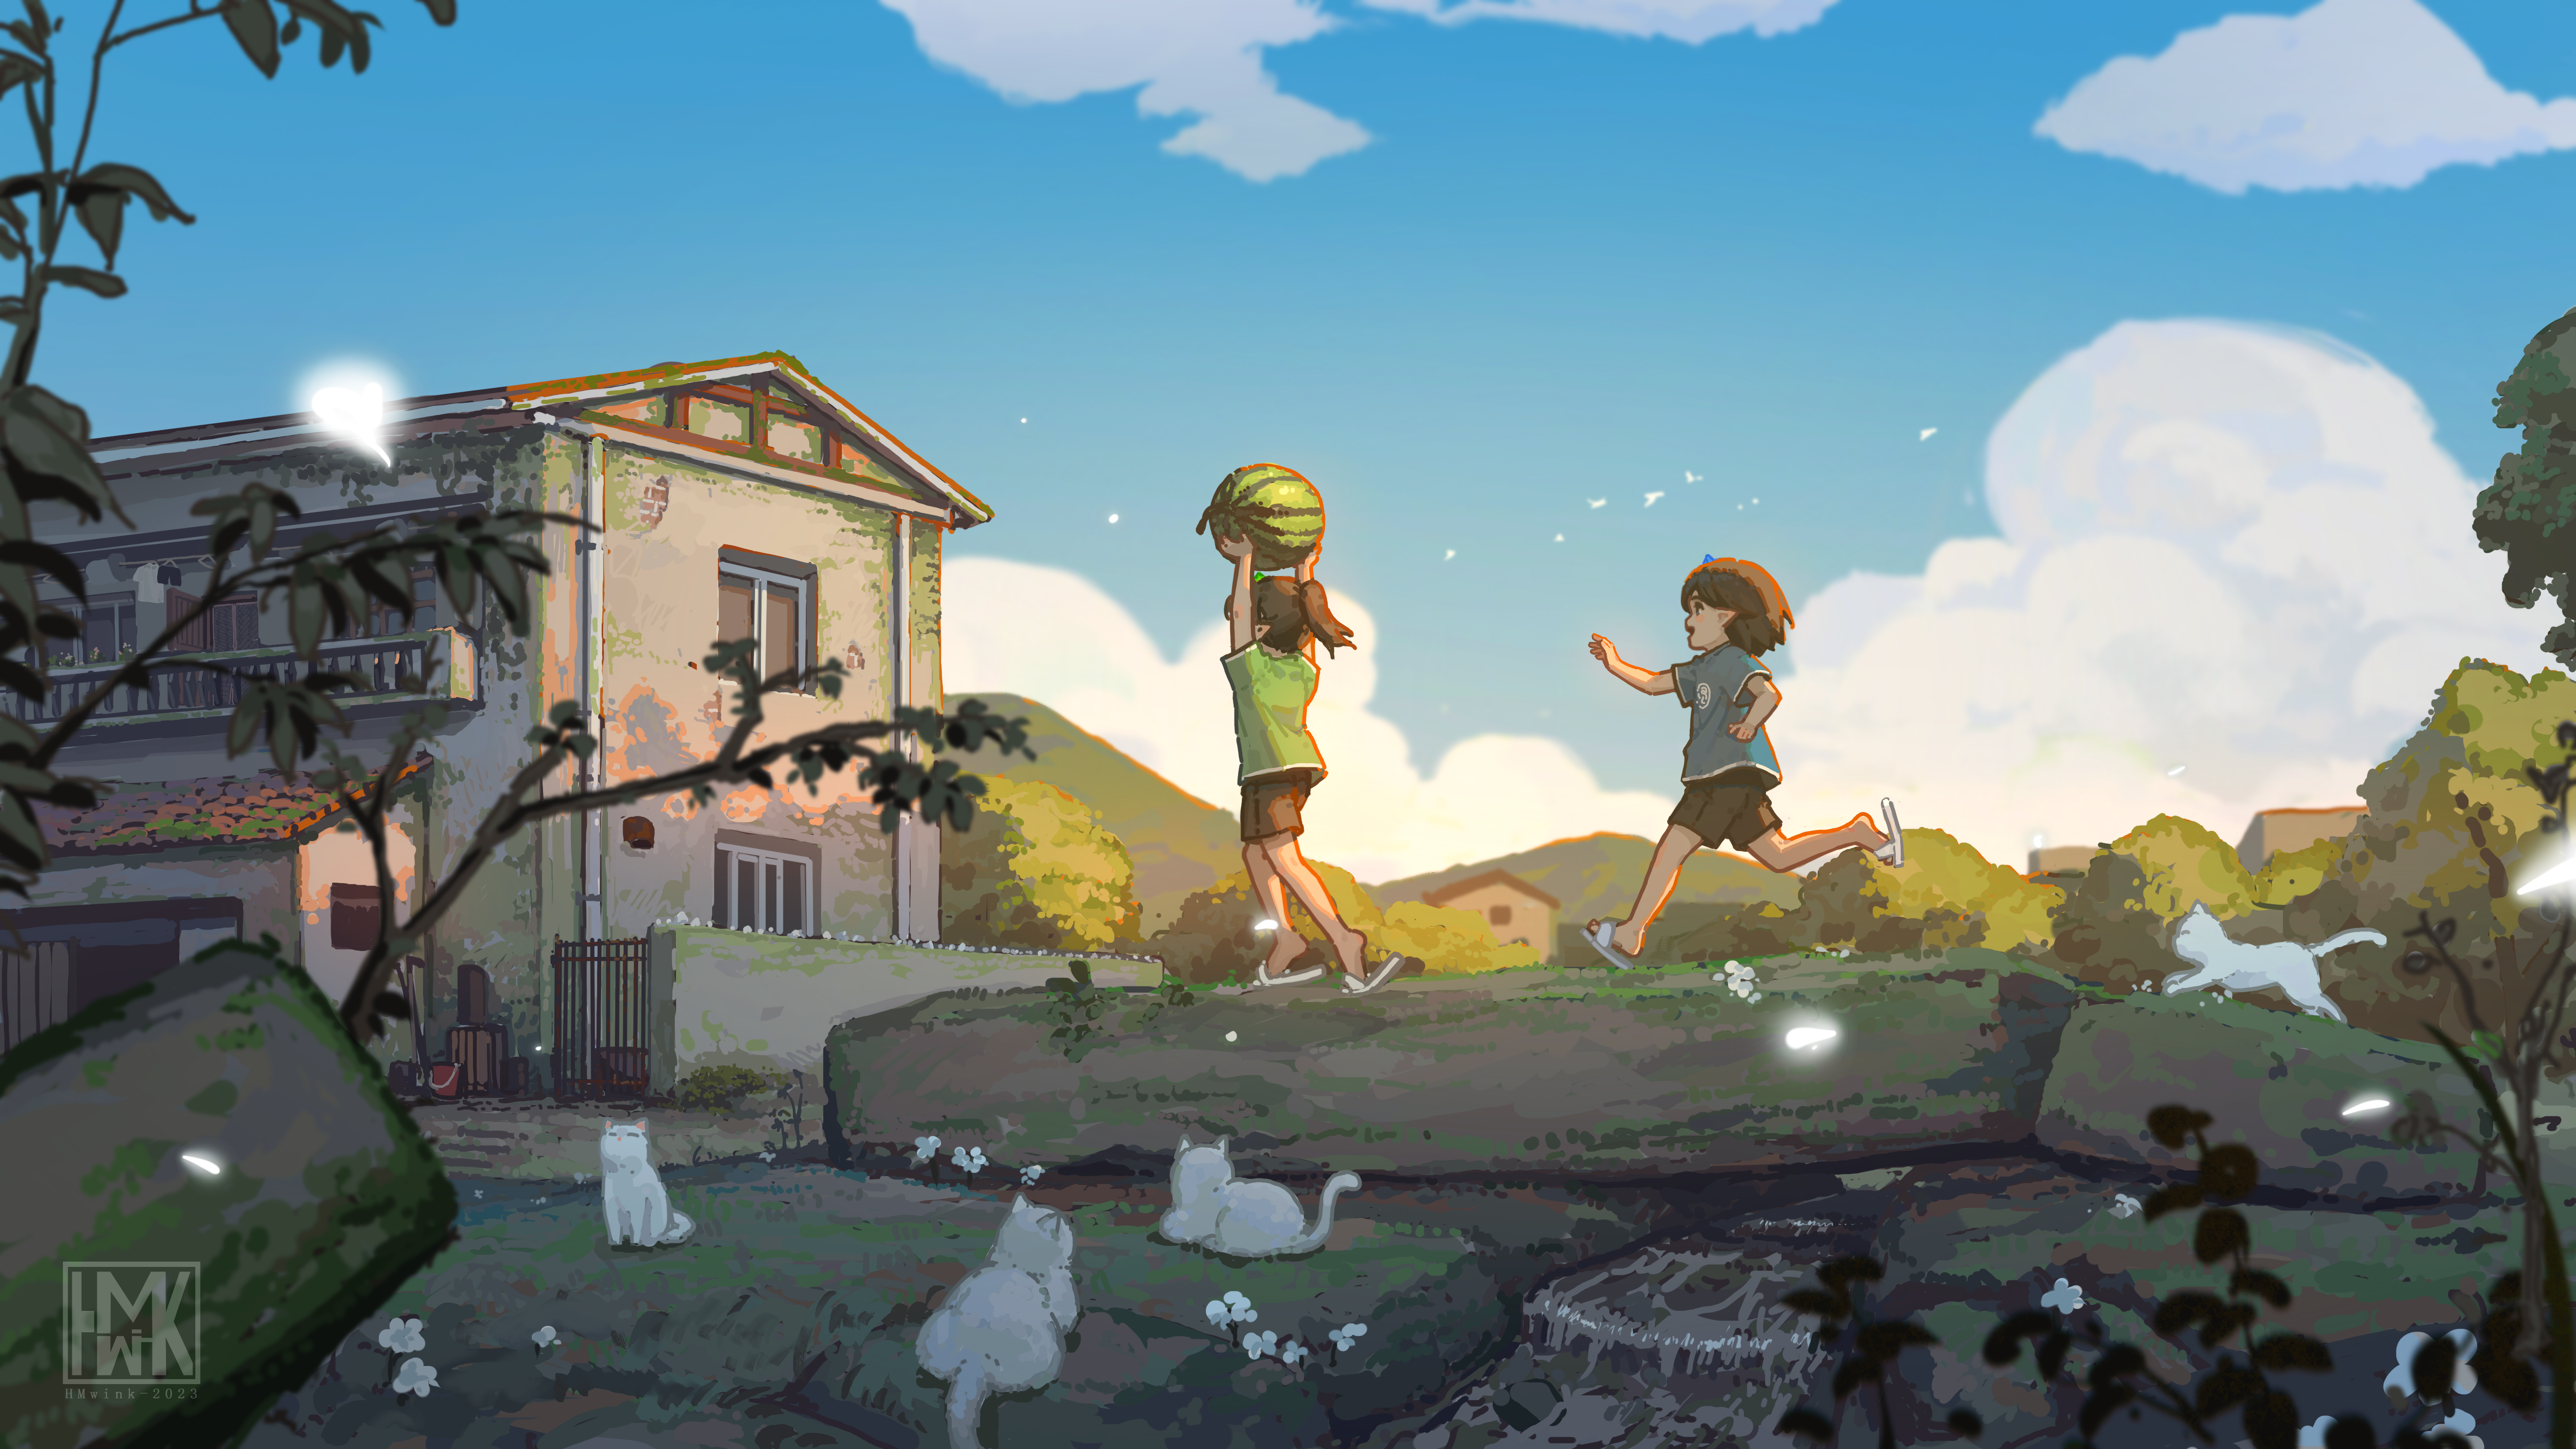 Anime 5275x2968 Hua Ming wink anime girls digital art artwork watermelons sky clouds running cats animals branch leaves pointy ears building Yun Xi